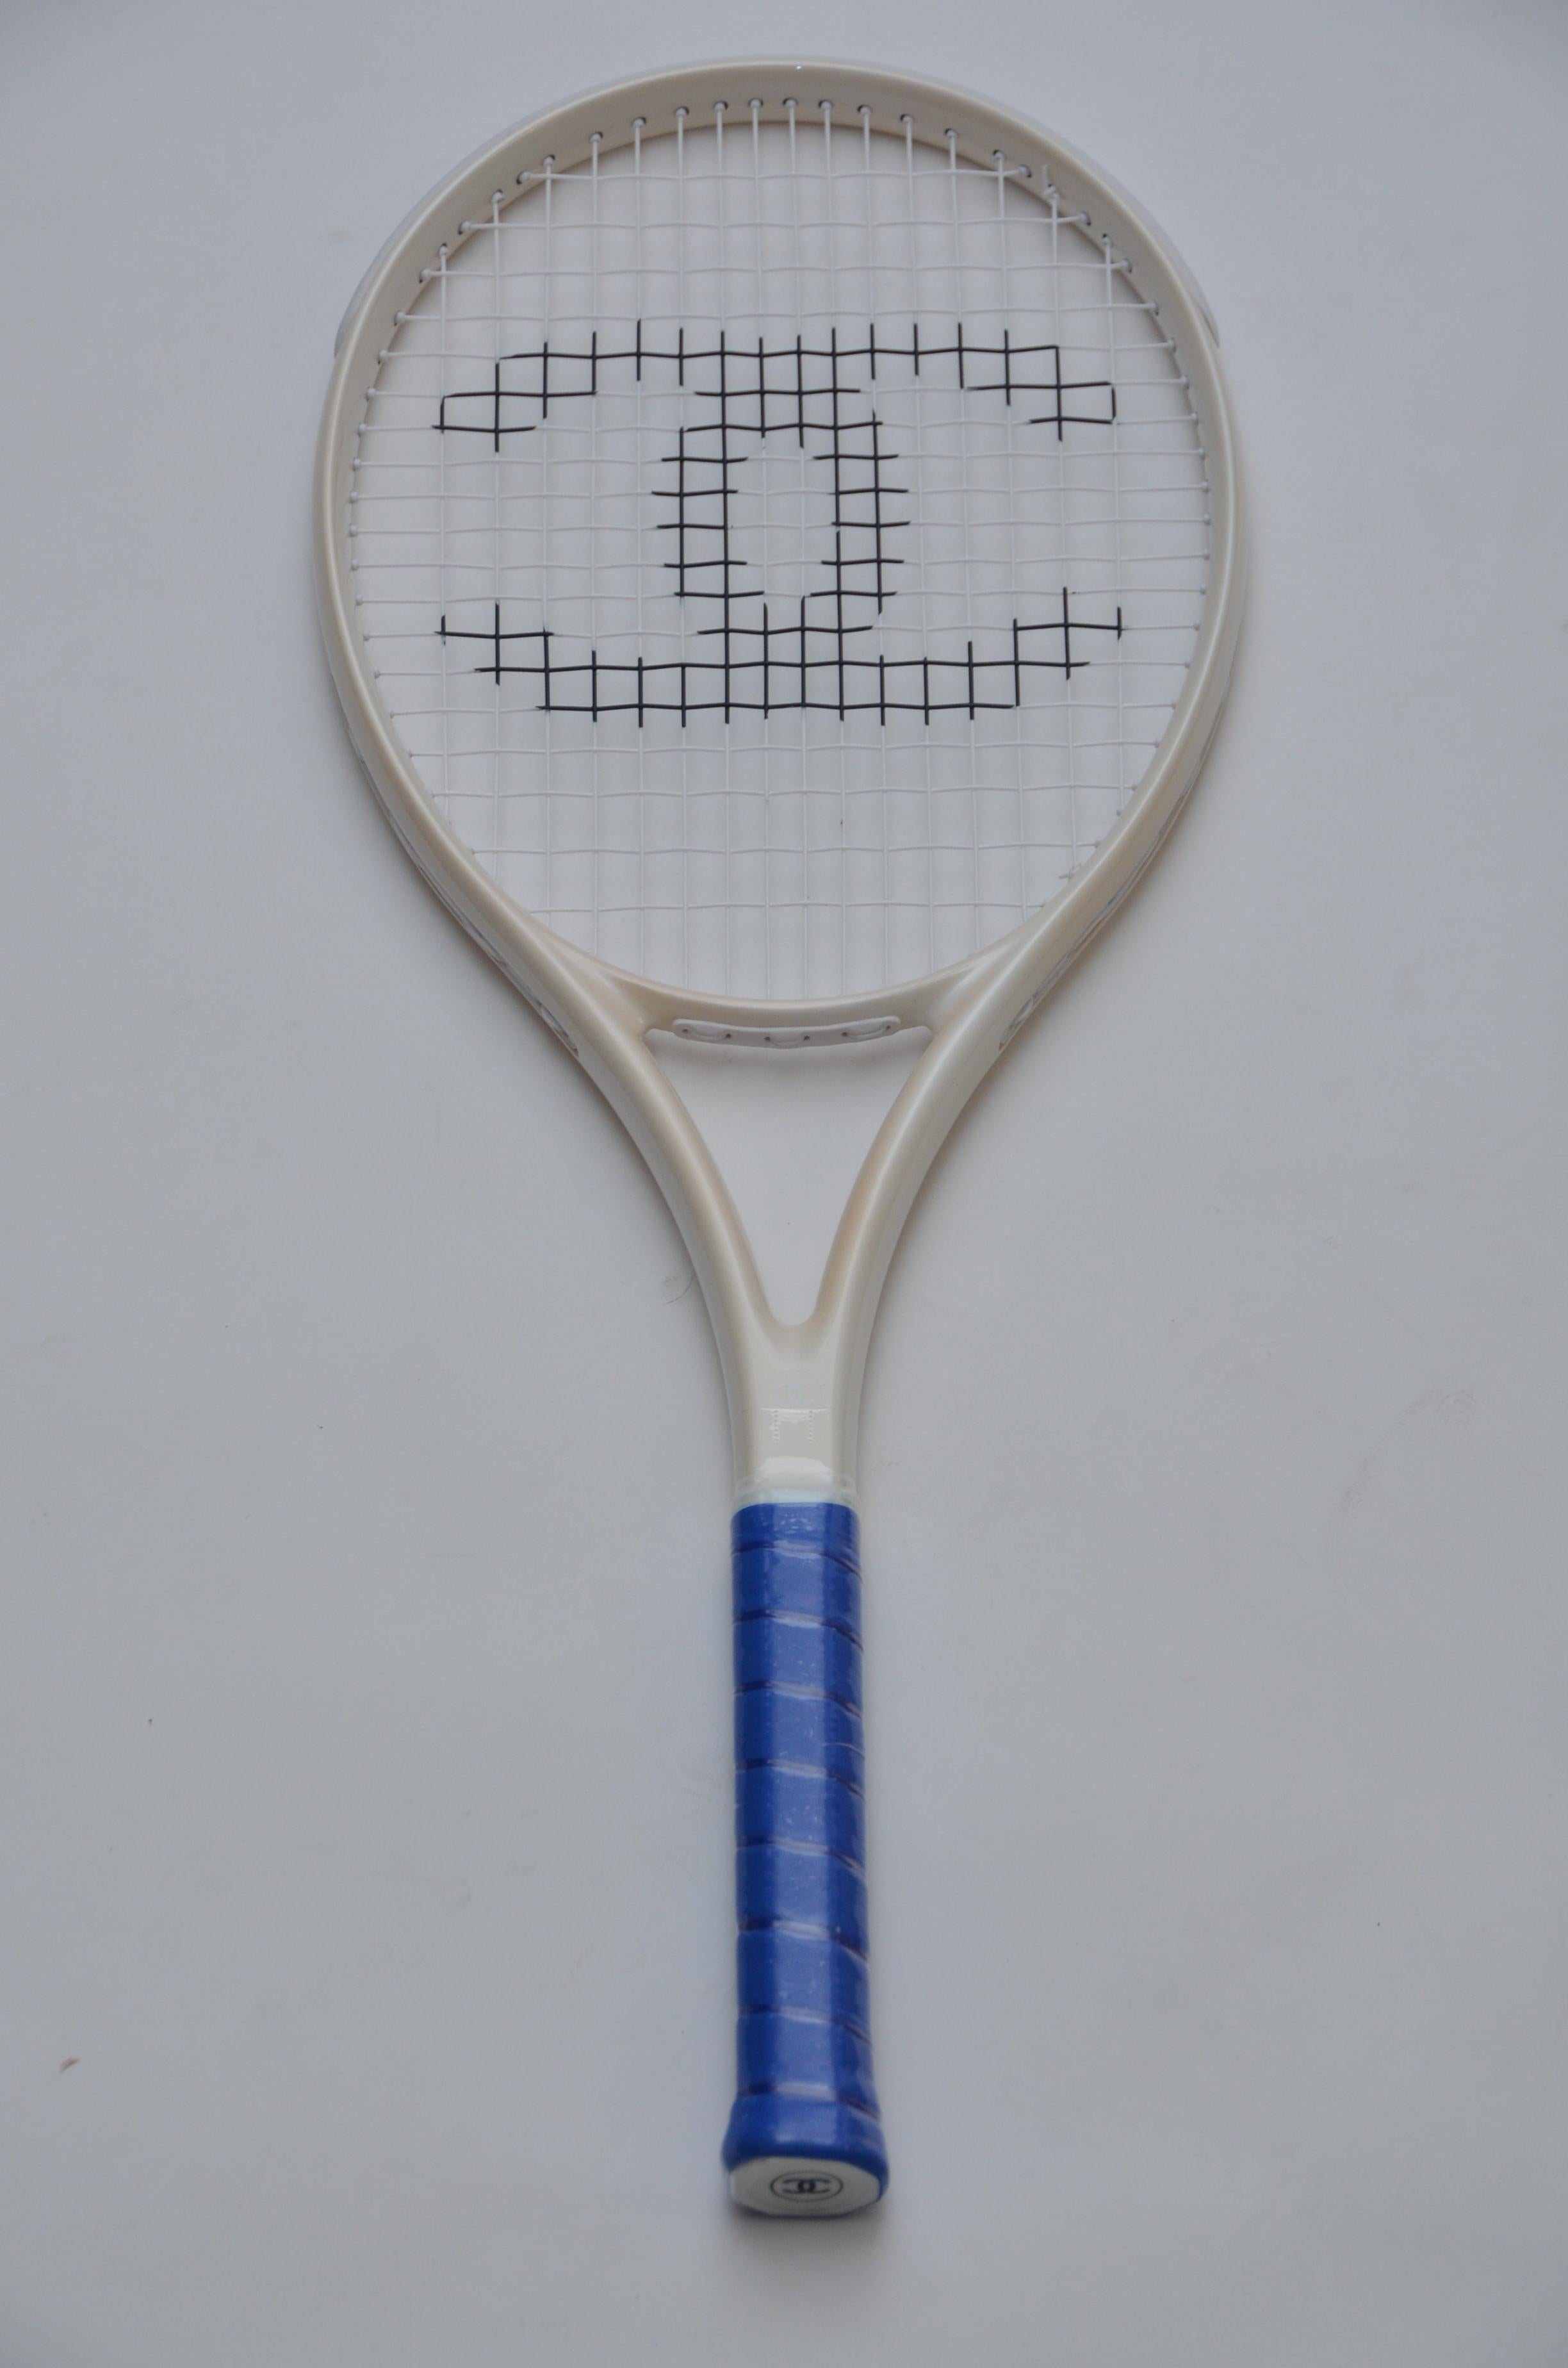 Chanel tennis racket in blue/ivory/black color combo. 
Brand new with tags,store fresh,never used ......



FINAL SALE.